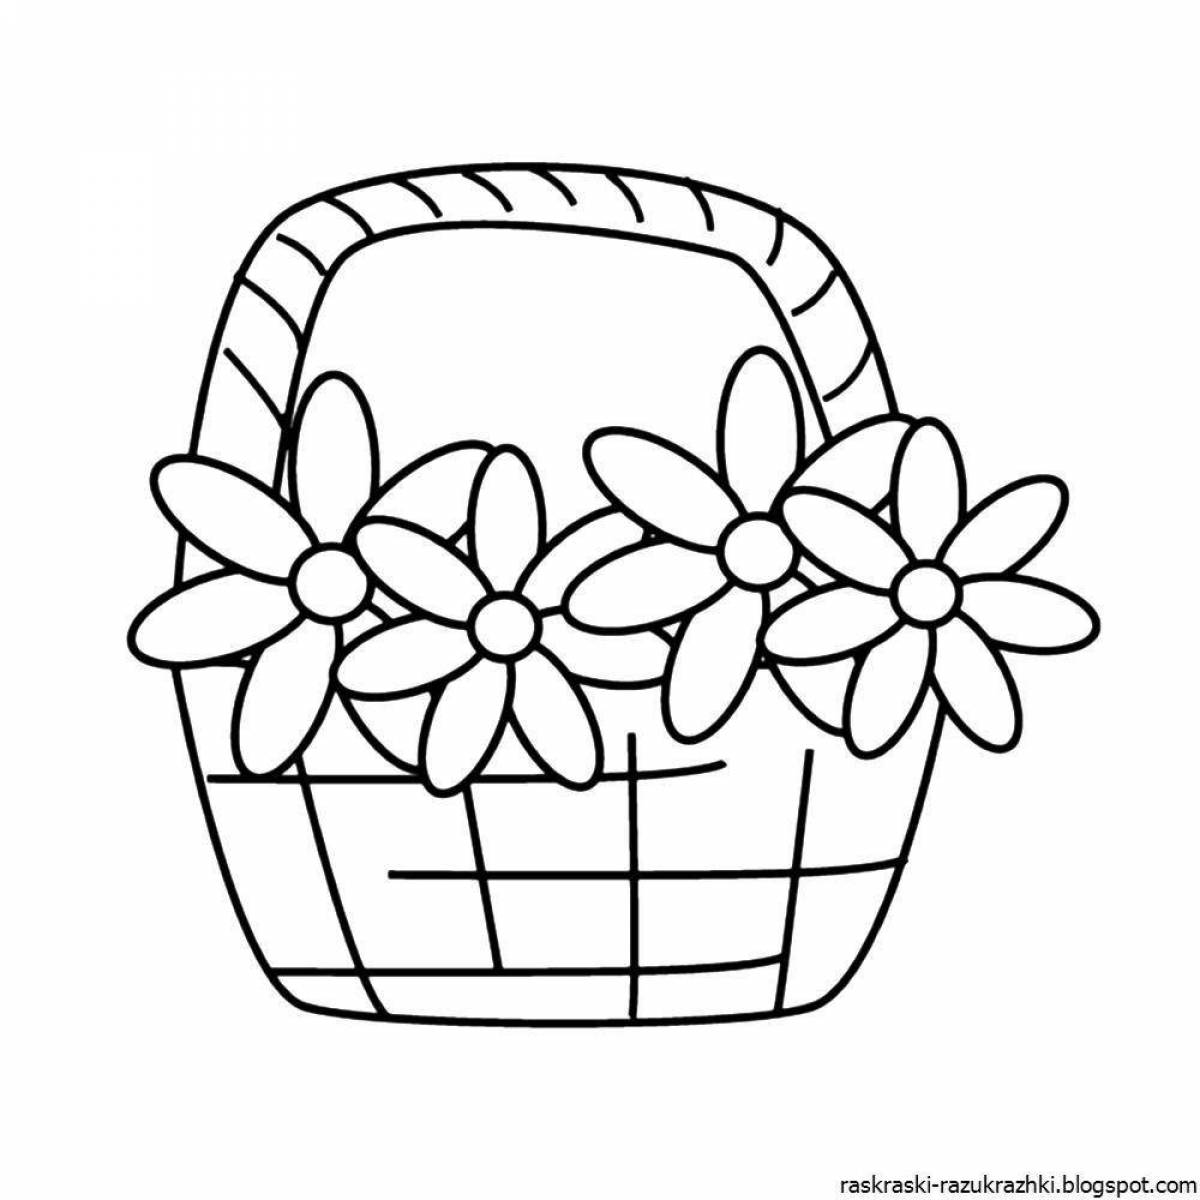 Coloring book cheerful basket of flowers